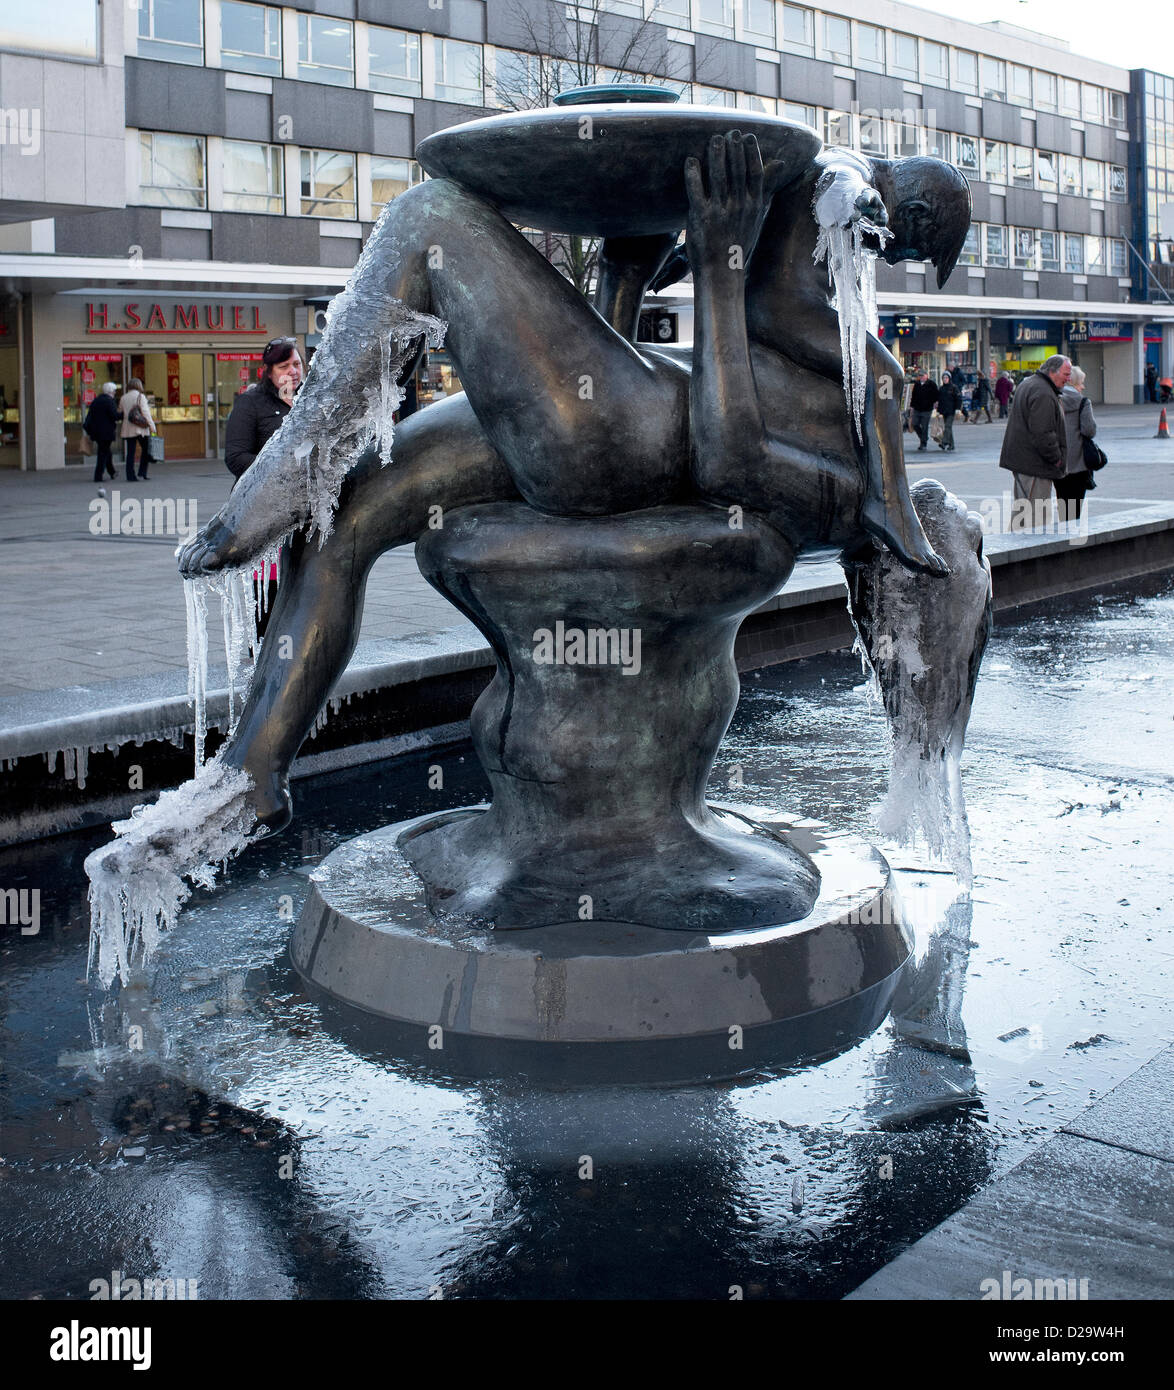 17th January, 2013. Freezing conditions hit Essex, UK. The popular Mother and Child fountain in Basildon Town Centre had to be turned off due to being covered in ice. Stock Photo